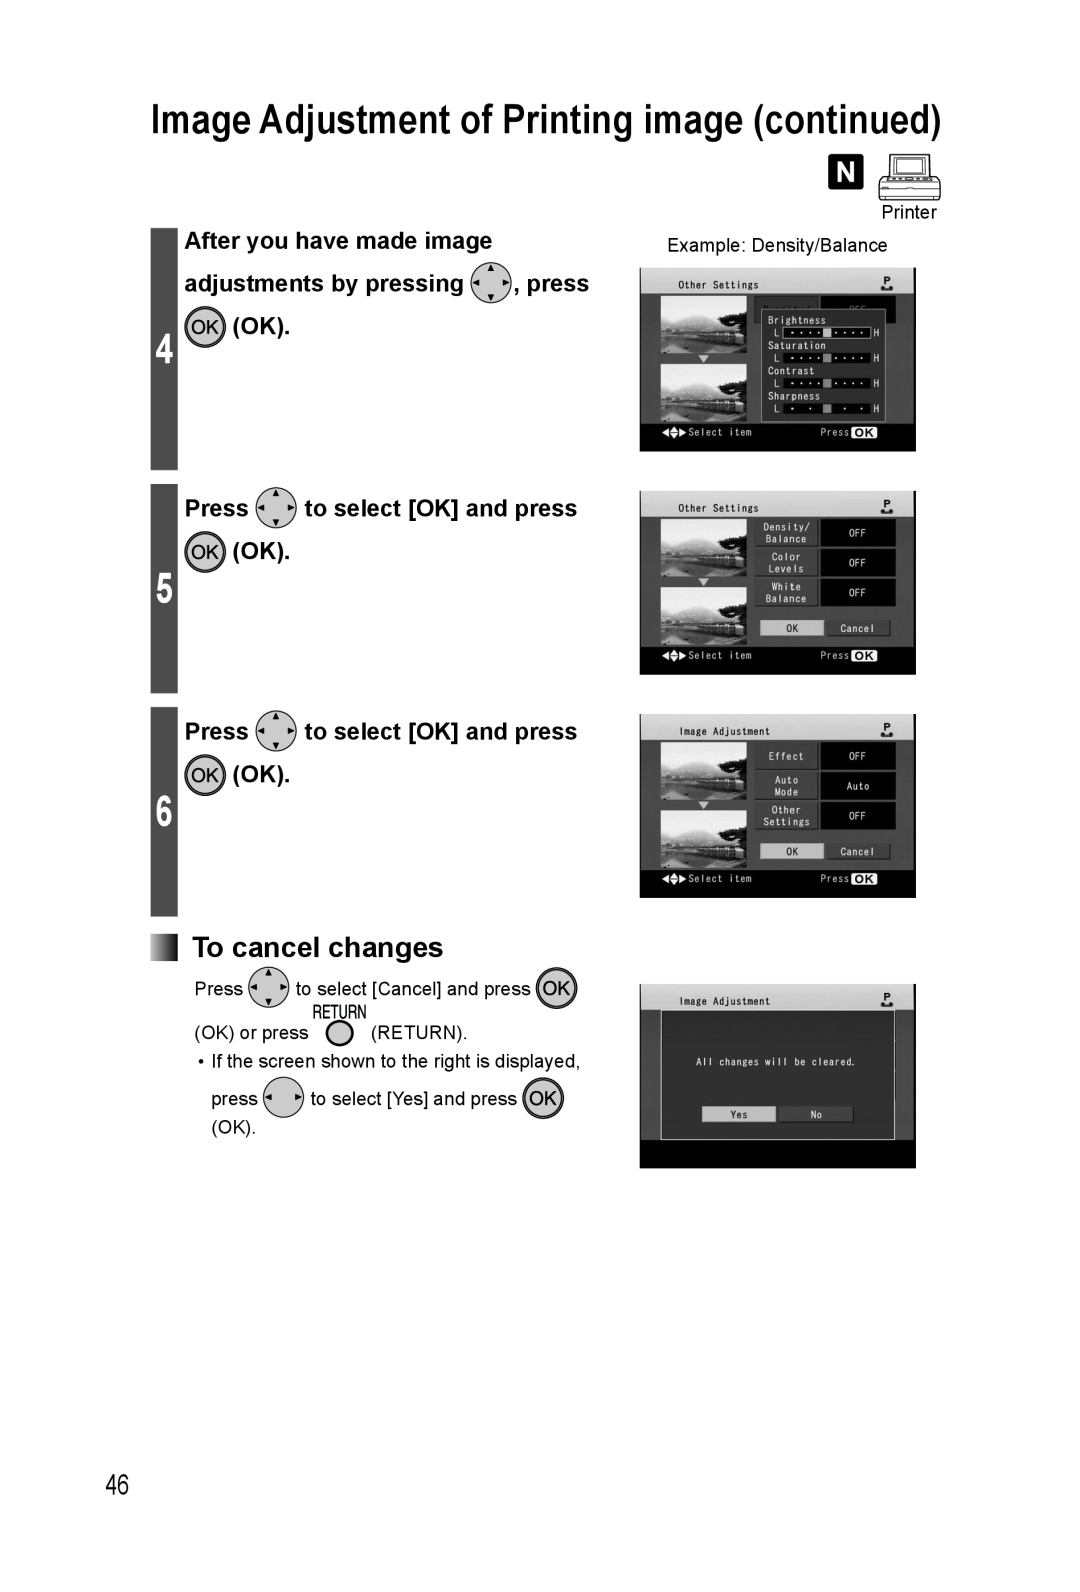 Panasonic KX-PX20M Image Adjustment of Printing image continued, To cancel changes, Press to select OK and press OK 